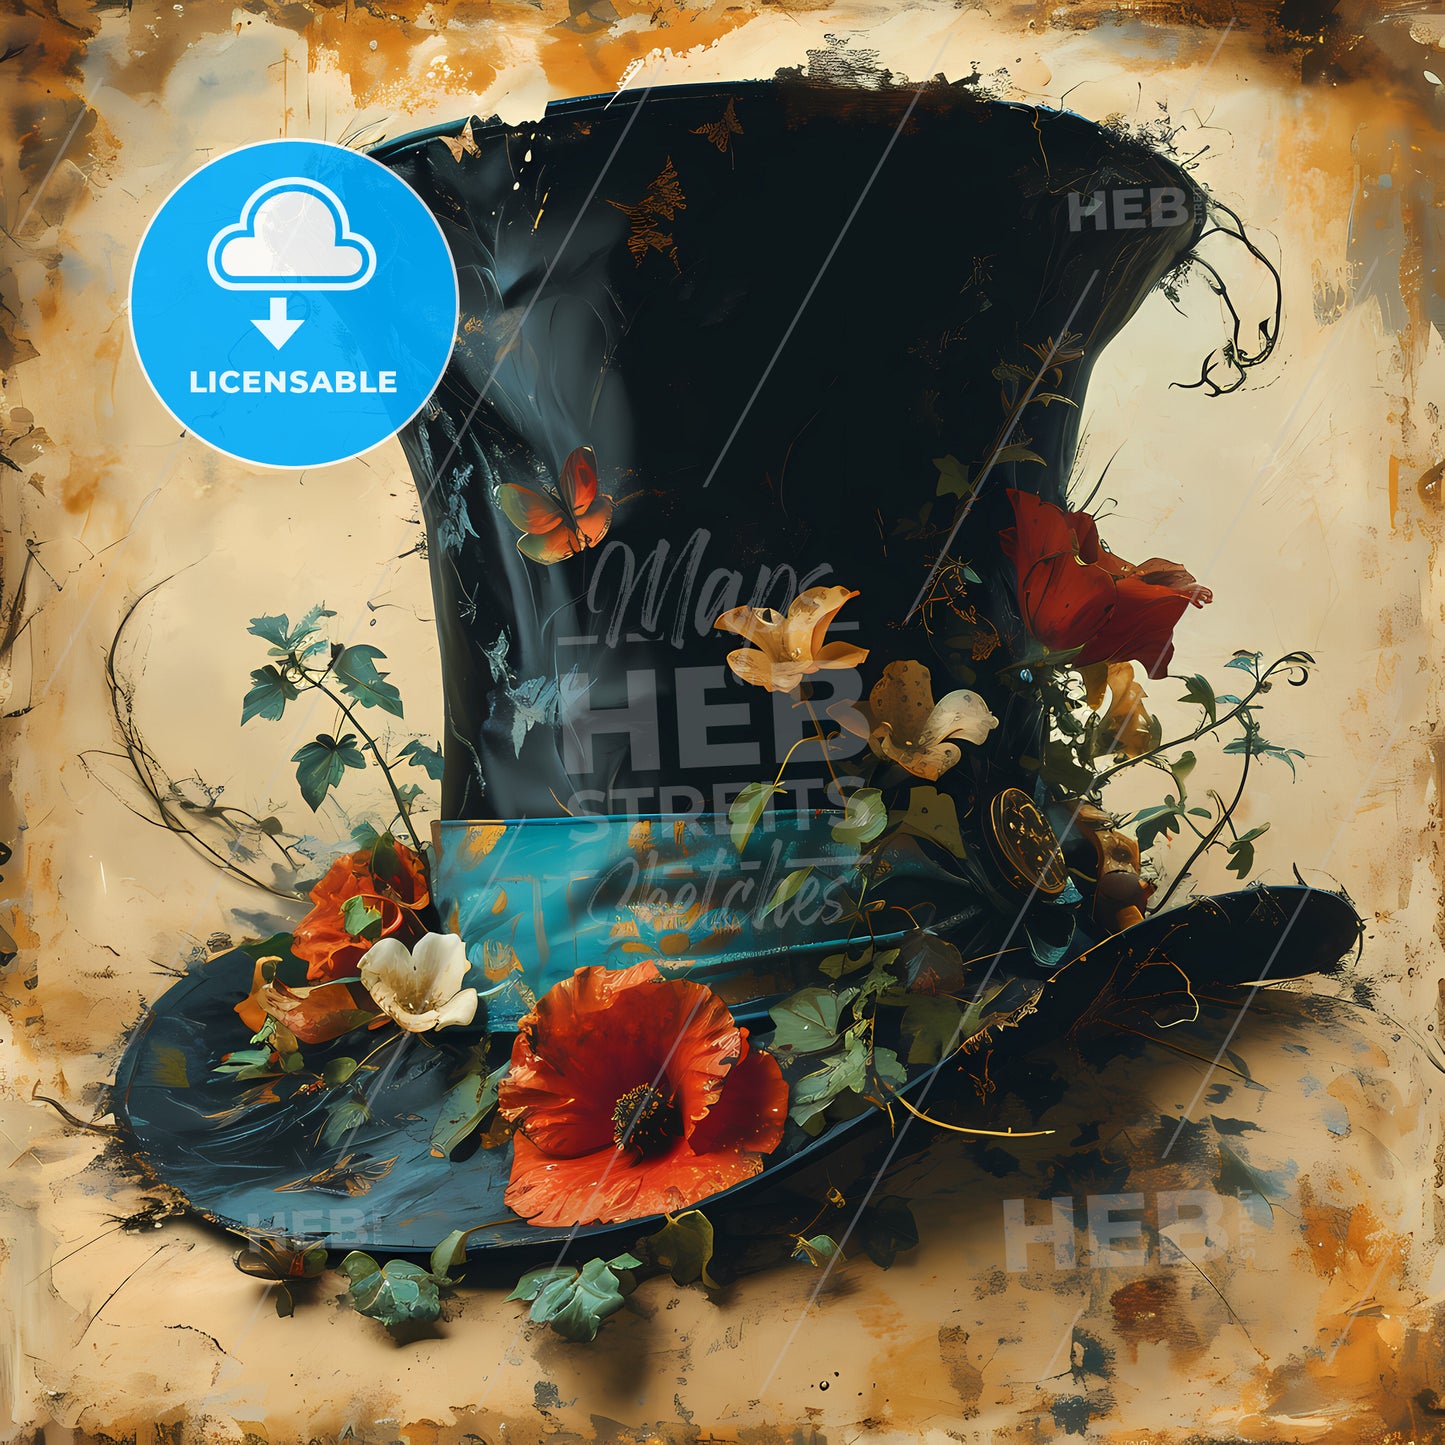 Graphic Design Victorian Steampunk, A Black Top Hat With Flowers